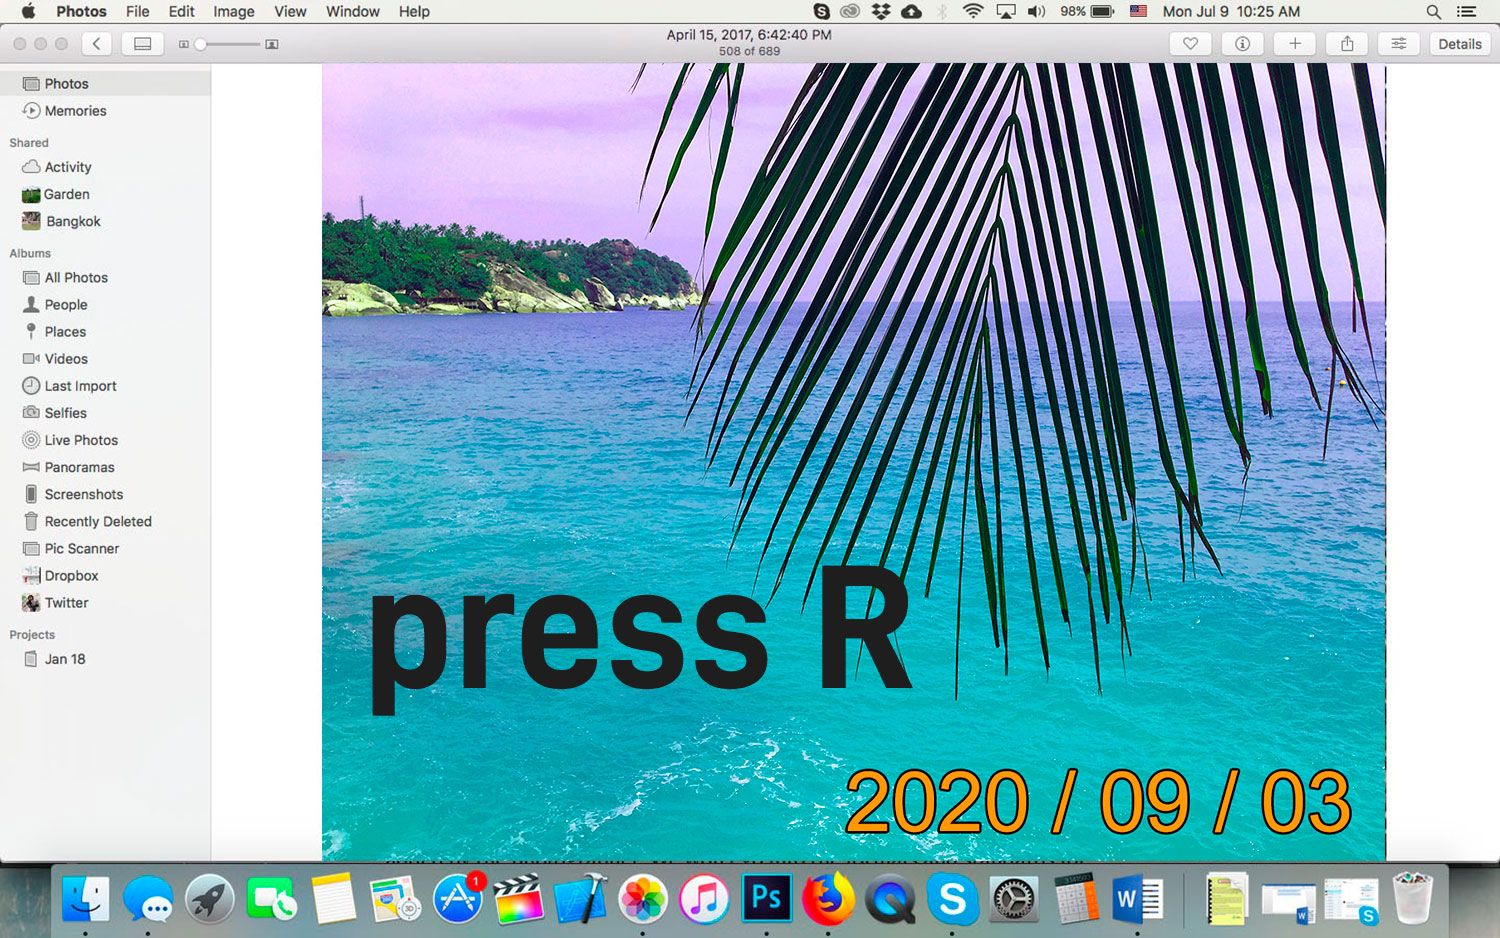 Removed date stamp on Mac OsX Photos..